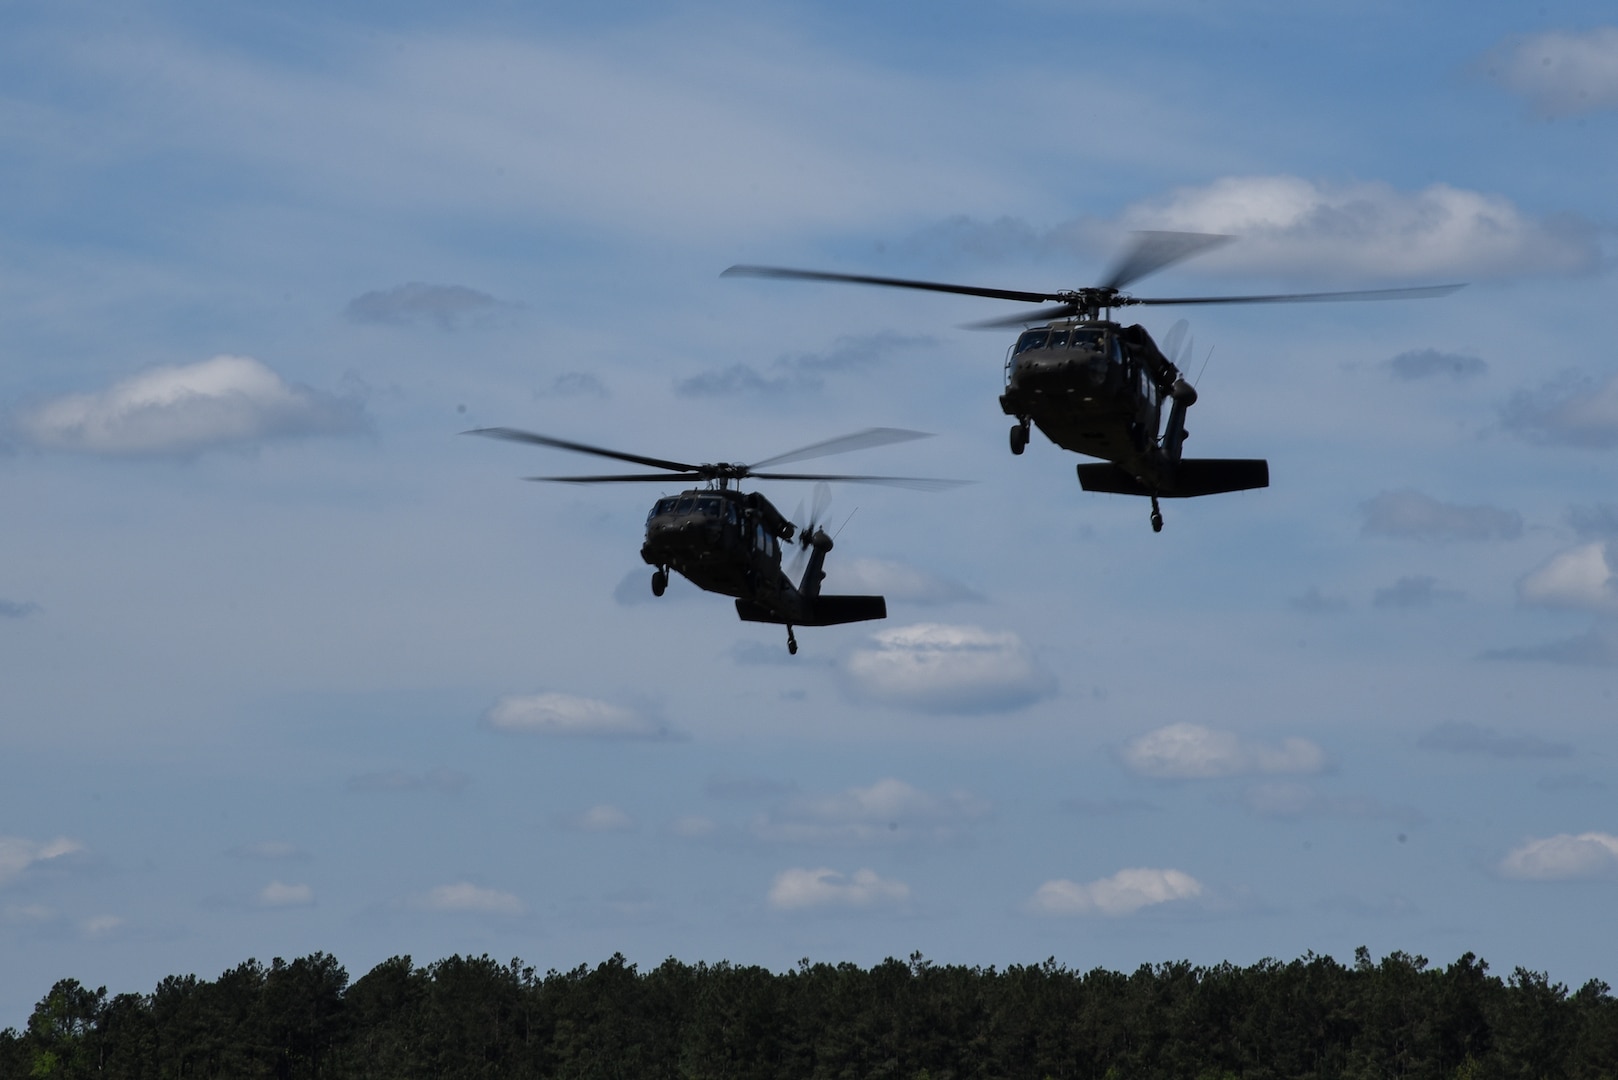 Cadets enrolled in the Virginia Army National Guard’s Simultaneous Membership Program take to the skies on board UH-60 Black Hawk helicopters April 18, 2021, during a three-day field training exercise at Fort Pickett, Virginia. The cadets came together from universities across the state and spent the weekend gaining familiarity with military tasks. (U.S. Army National Guard photo by Sgt. 1st Class Terra C. Gatti)